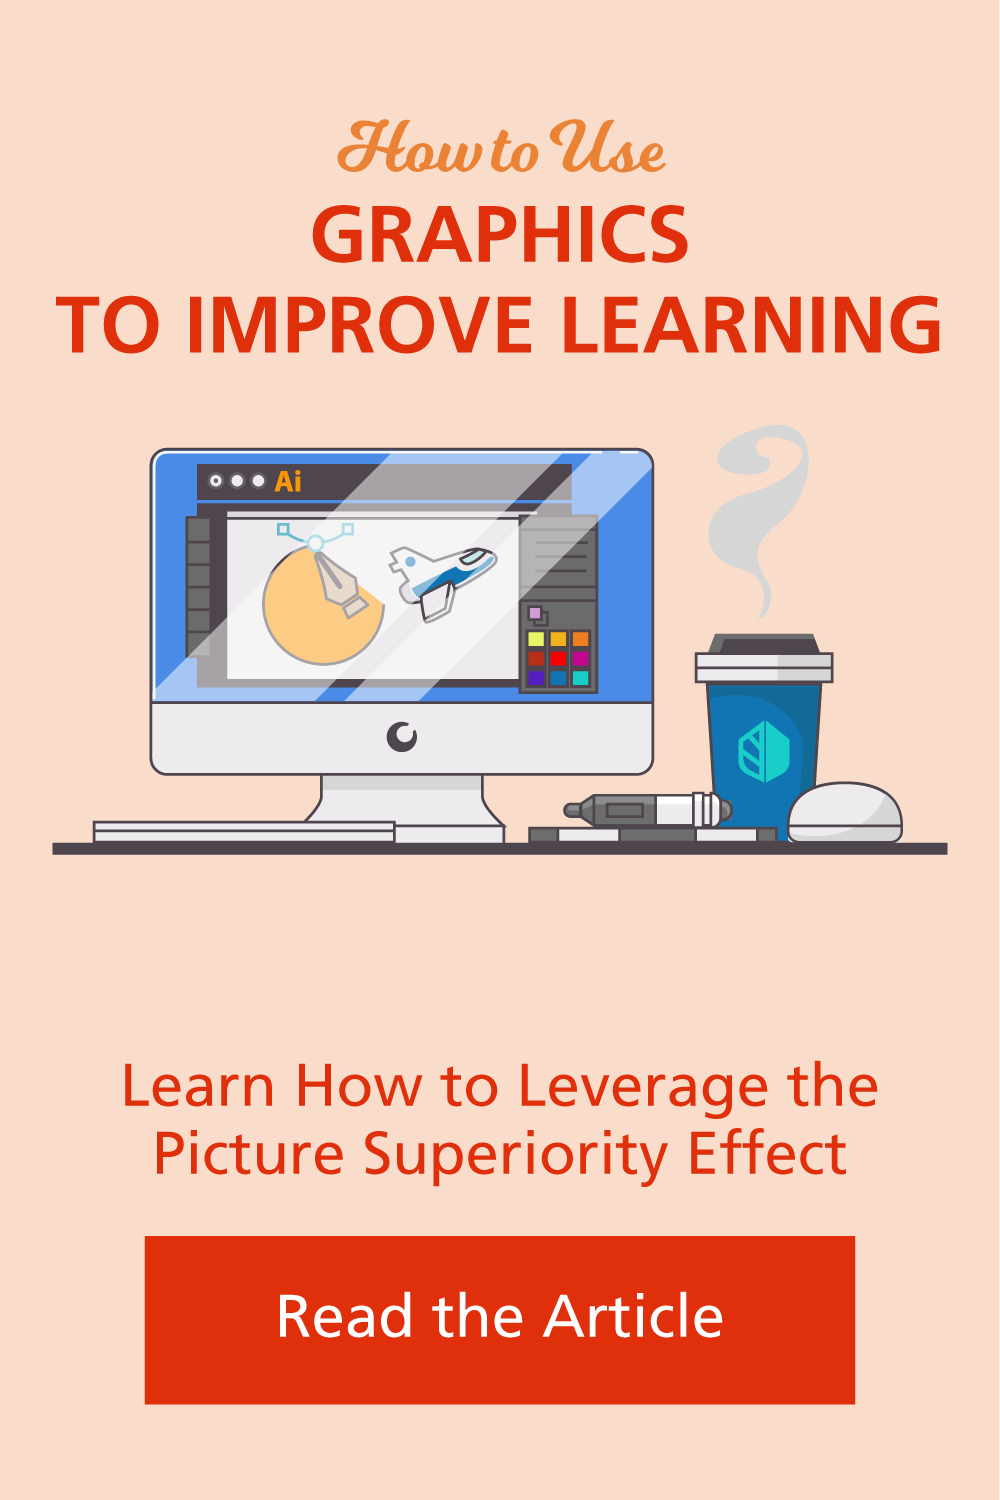 How to Use Graphics To Improve Learning